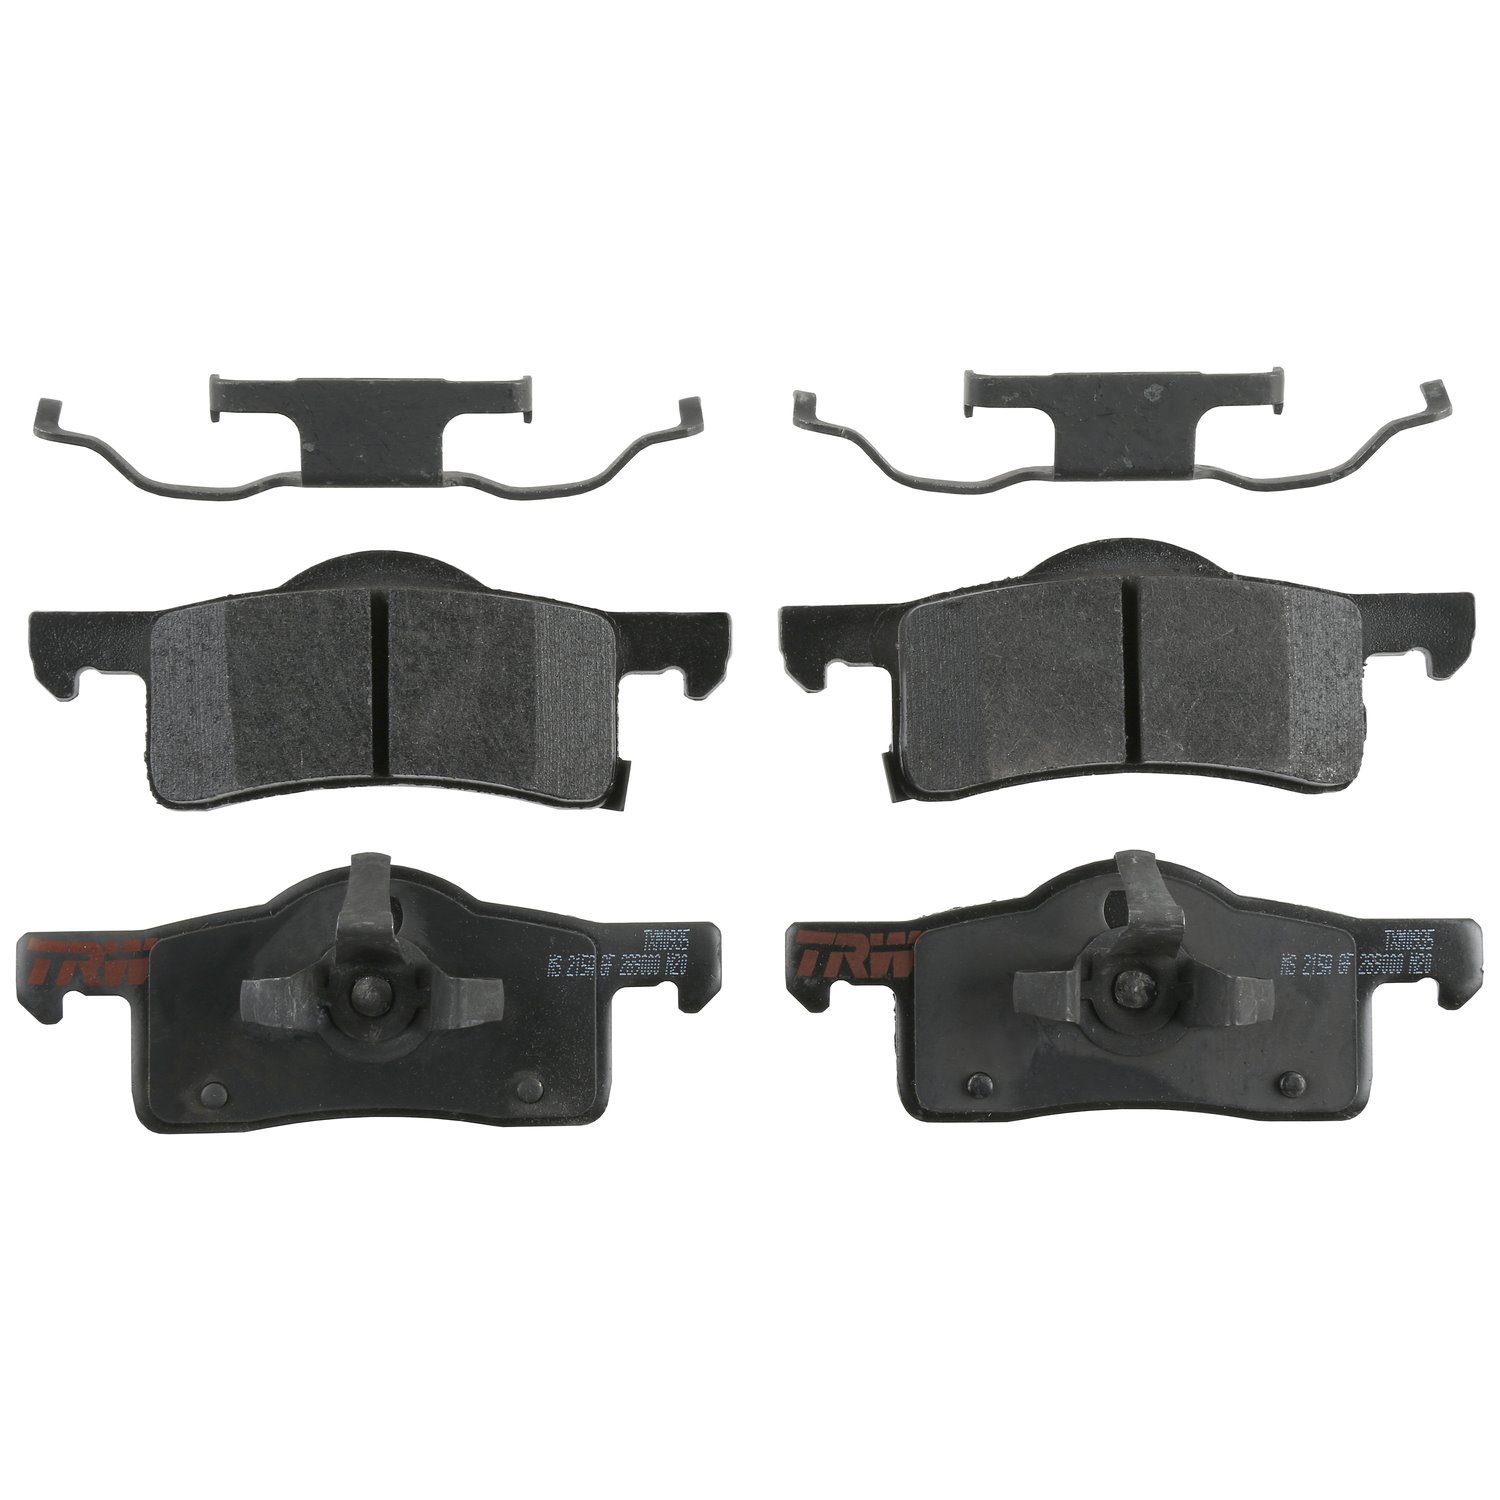 TXM0935 Ultra-Series Disc Brake Pad Set for Ford Expedition 2006-2003, Lincoln Navigator 2006-2003, Position: Rear